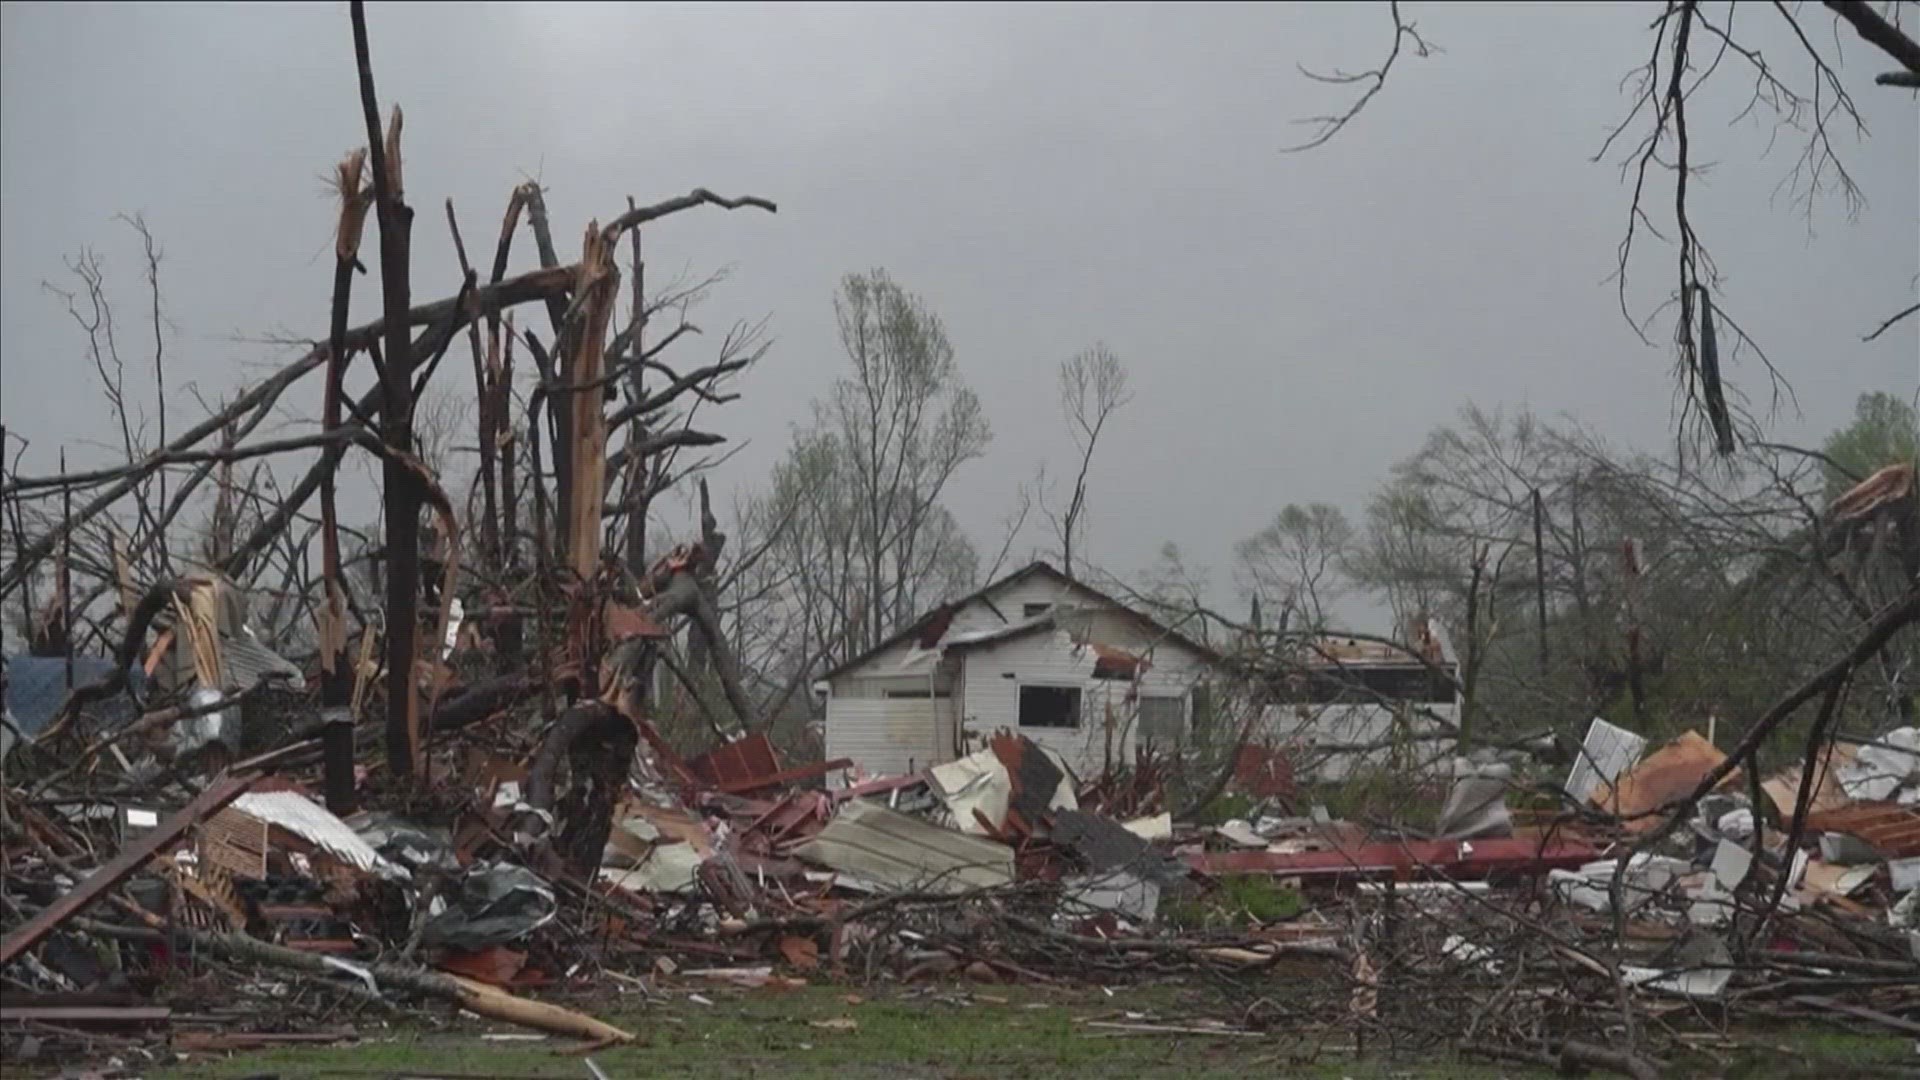 The tornado killed 25 and injured dozens in Mississippi. It destroyed many homes and businesses in Rolling Fork and Amory.